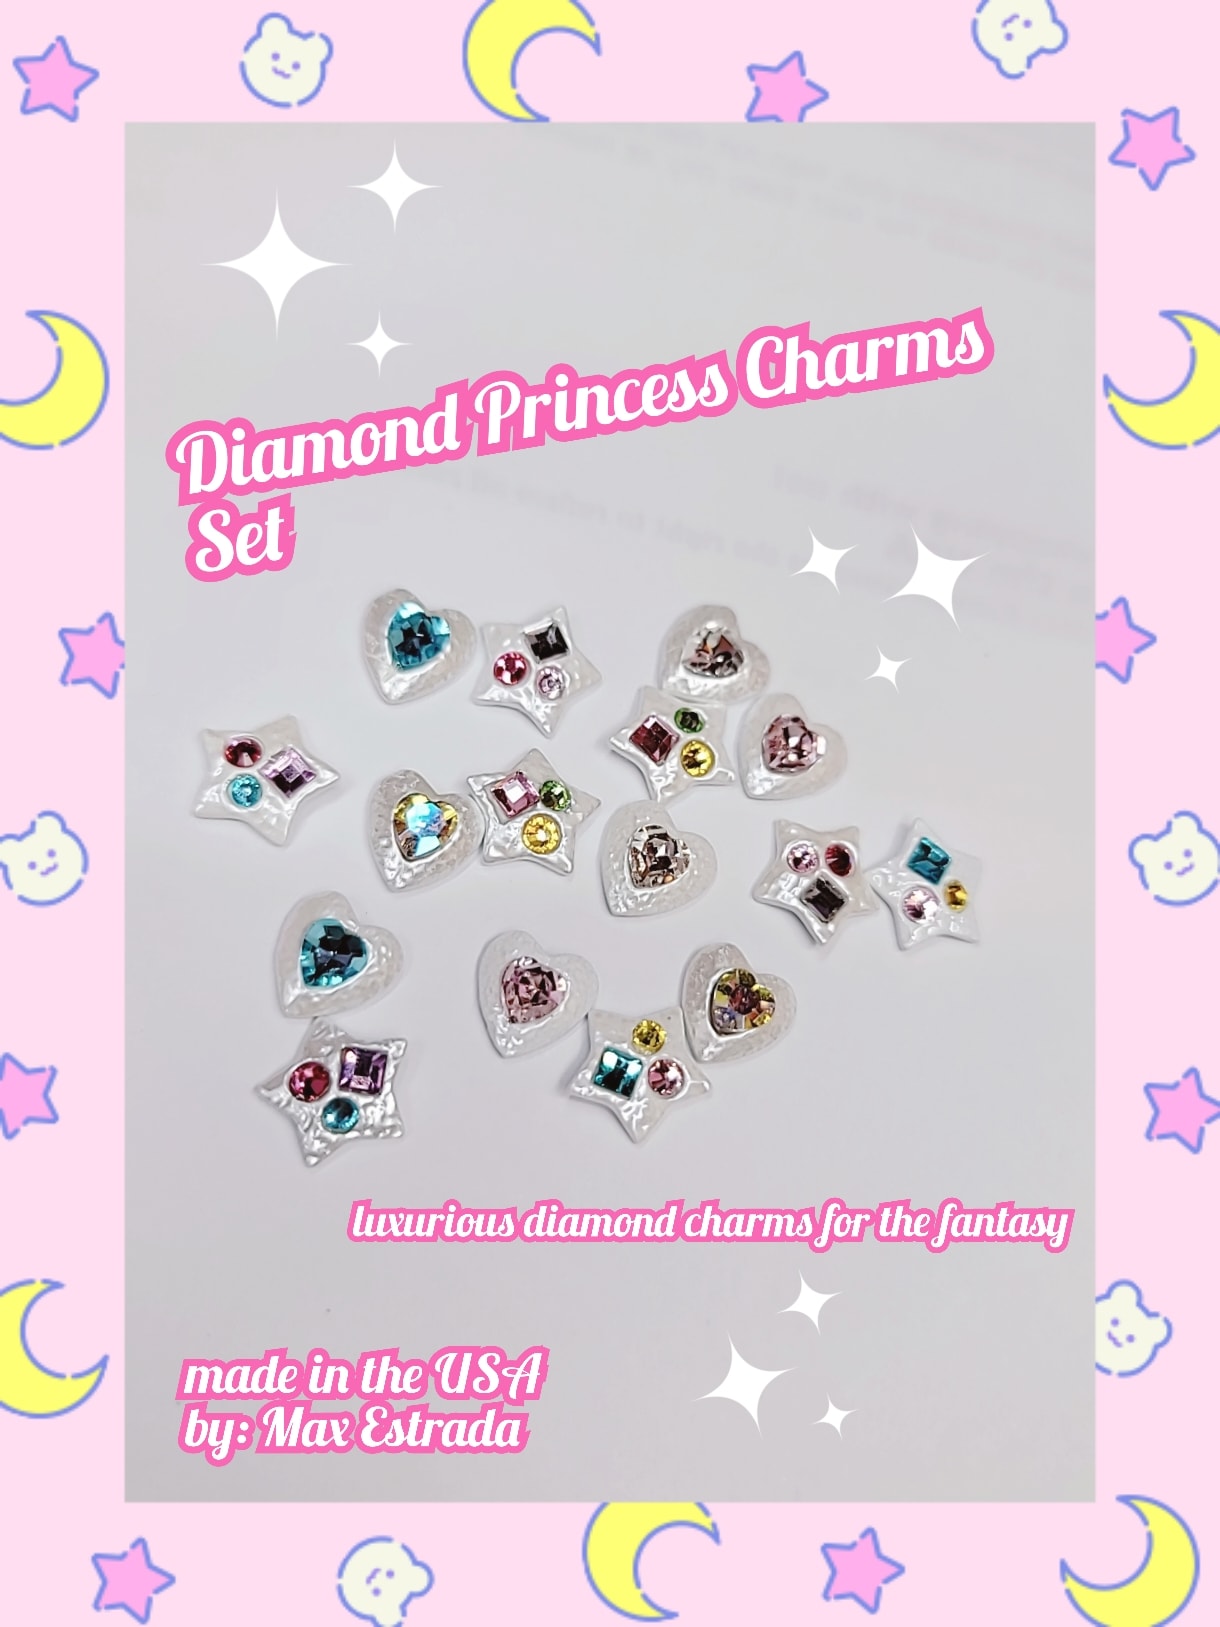 Diamond Princess charms !~ (3D Rhinestones for Nails, Nail Art Rhinestones, Luxury Charms Crystals Diamonds Gold Metal Gem Stones for DIY Nail Art Beauty Design, Nail Decoration Craft and Jewelry DIY Making)